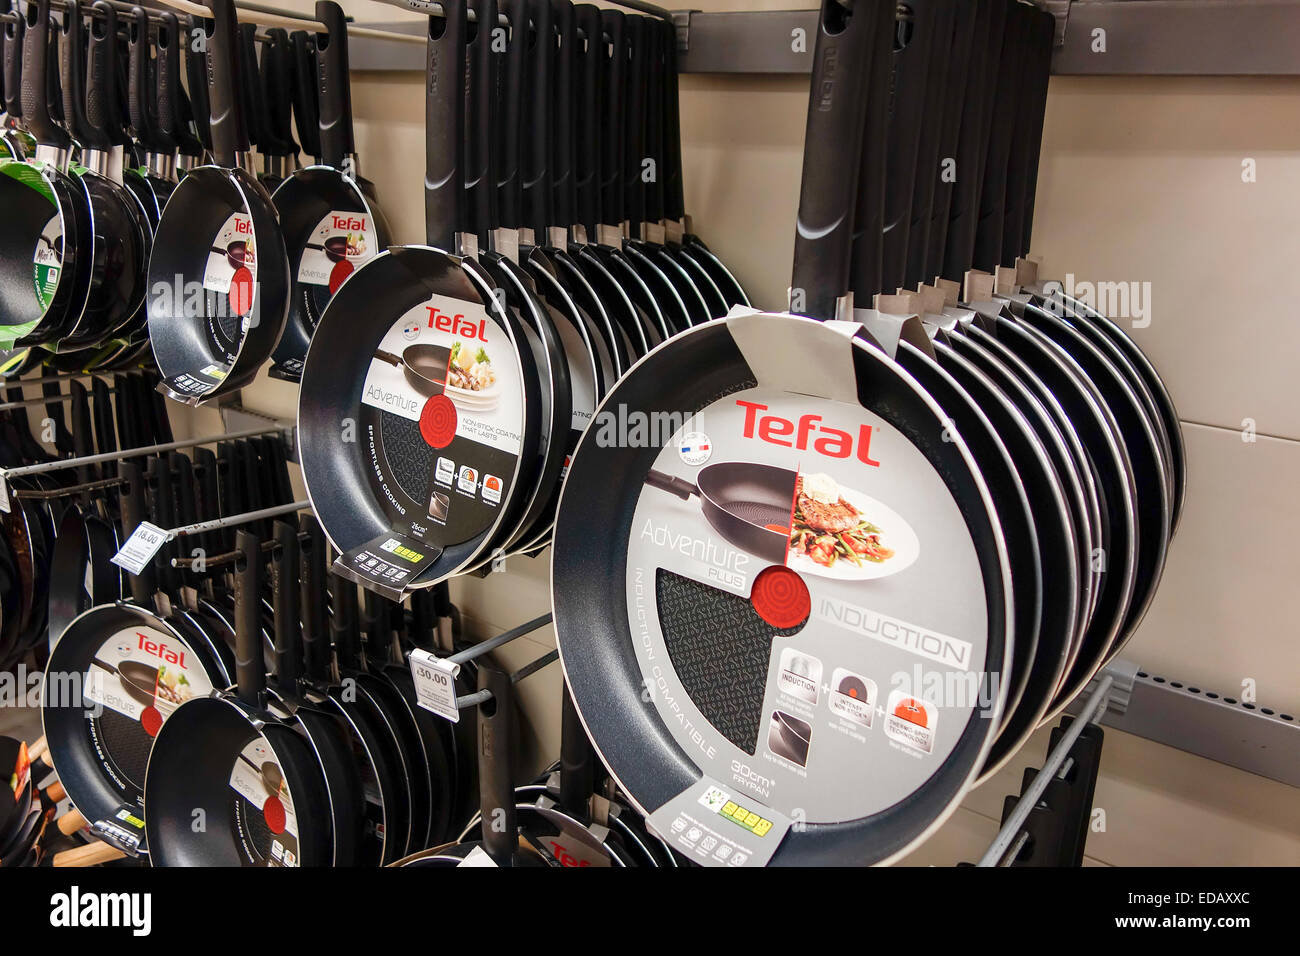 different sizes of Tefal red spot non stick frying pans hanging on display  and for sale in UK Tesco supermarket Stock Photo - Alamy